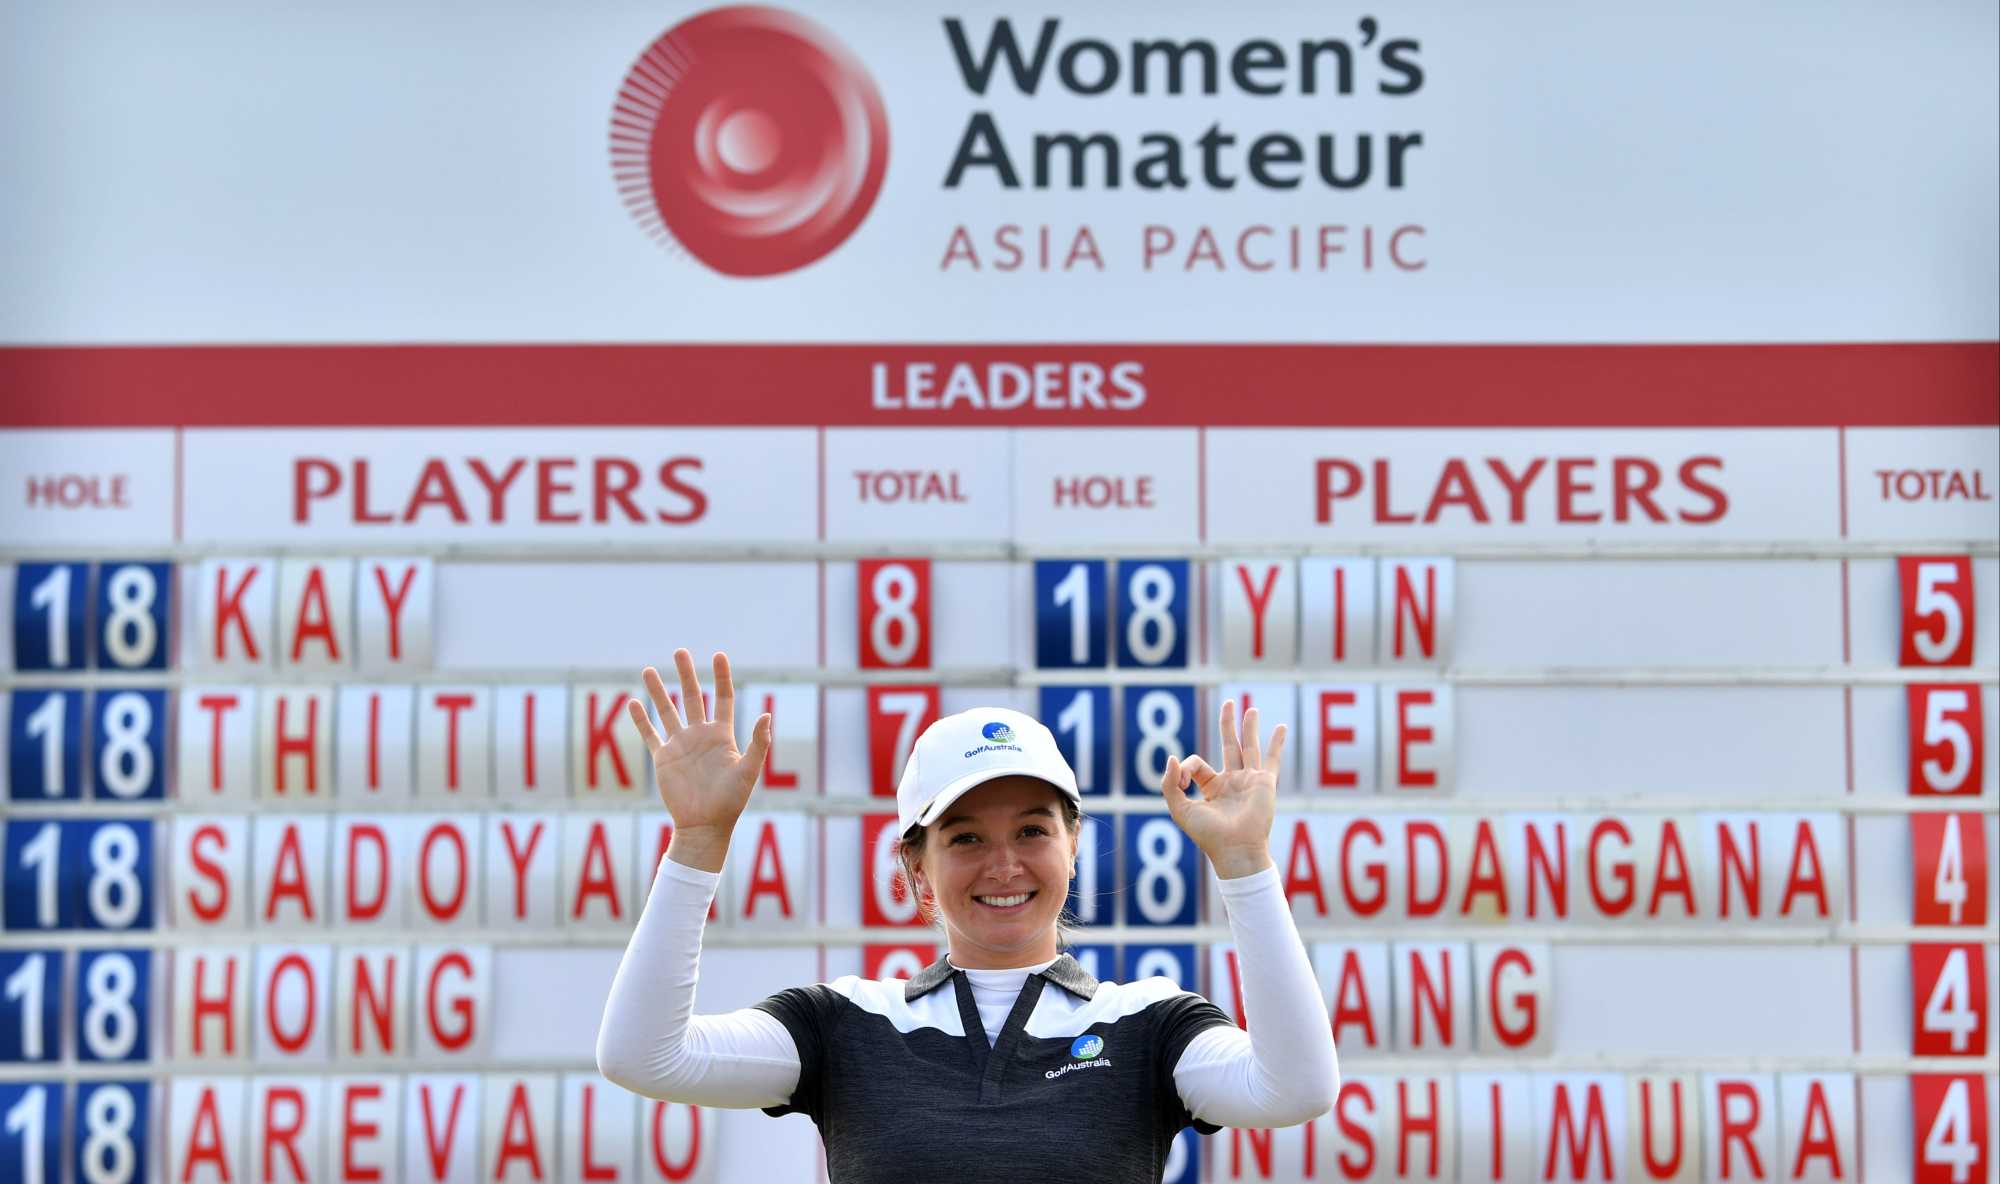 Becky Kay shoots an opening eight-under-par to break the course record in round one of the 2019 Women's Amateur Asia Pacific. Photo: WAAP